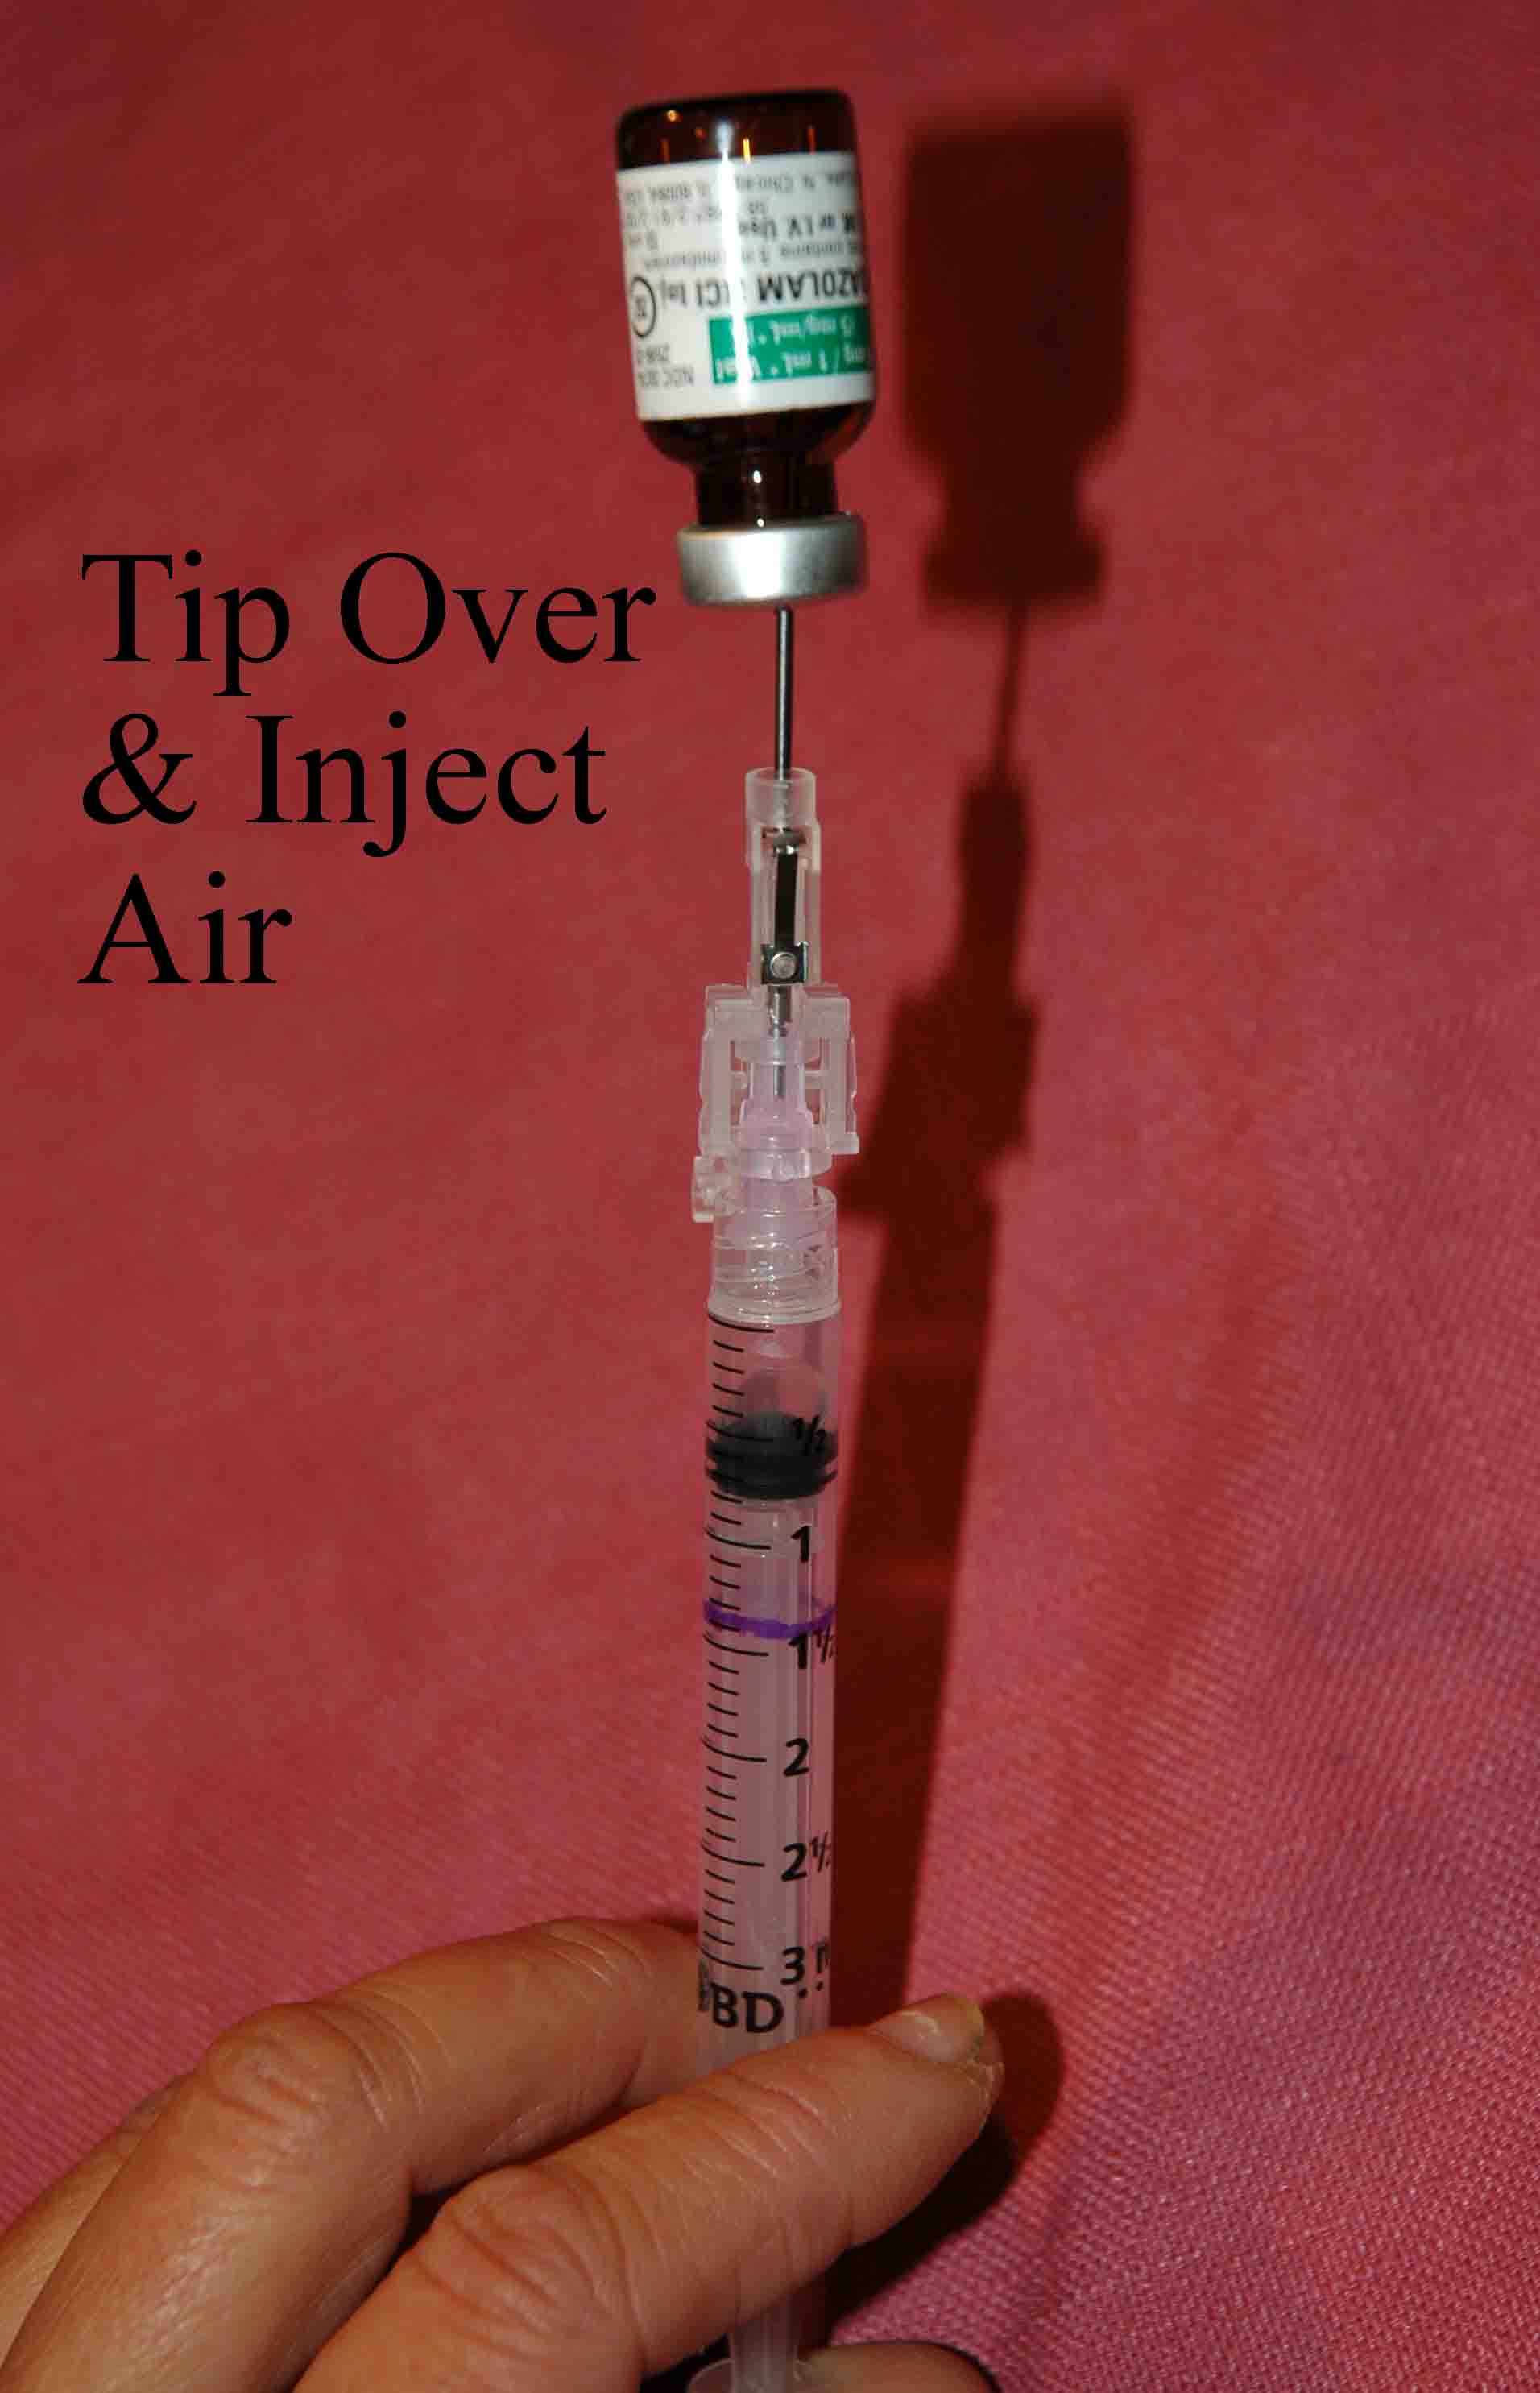 Inject air into the vial and tip it upsidedown